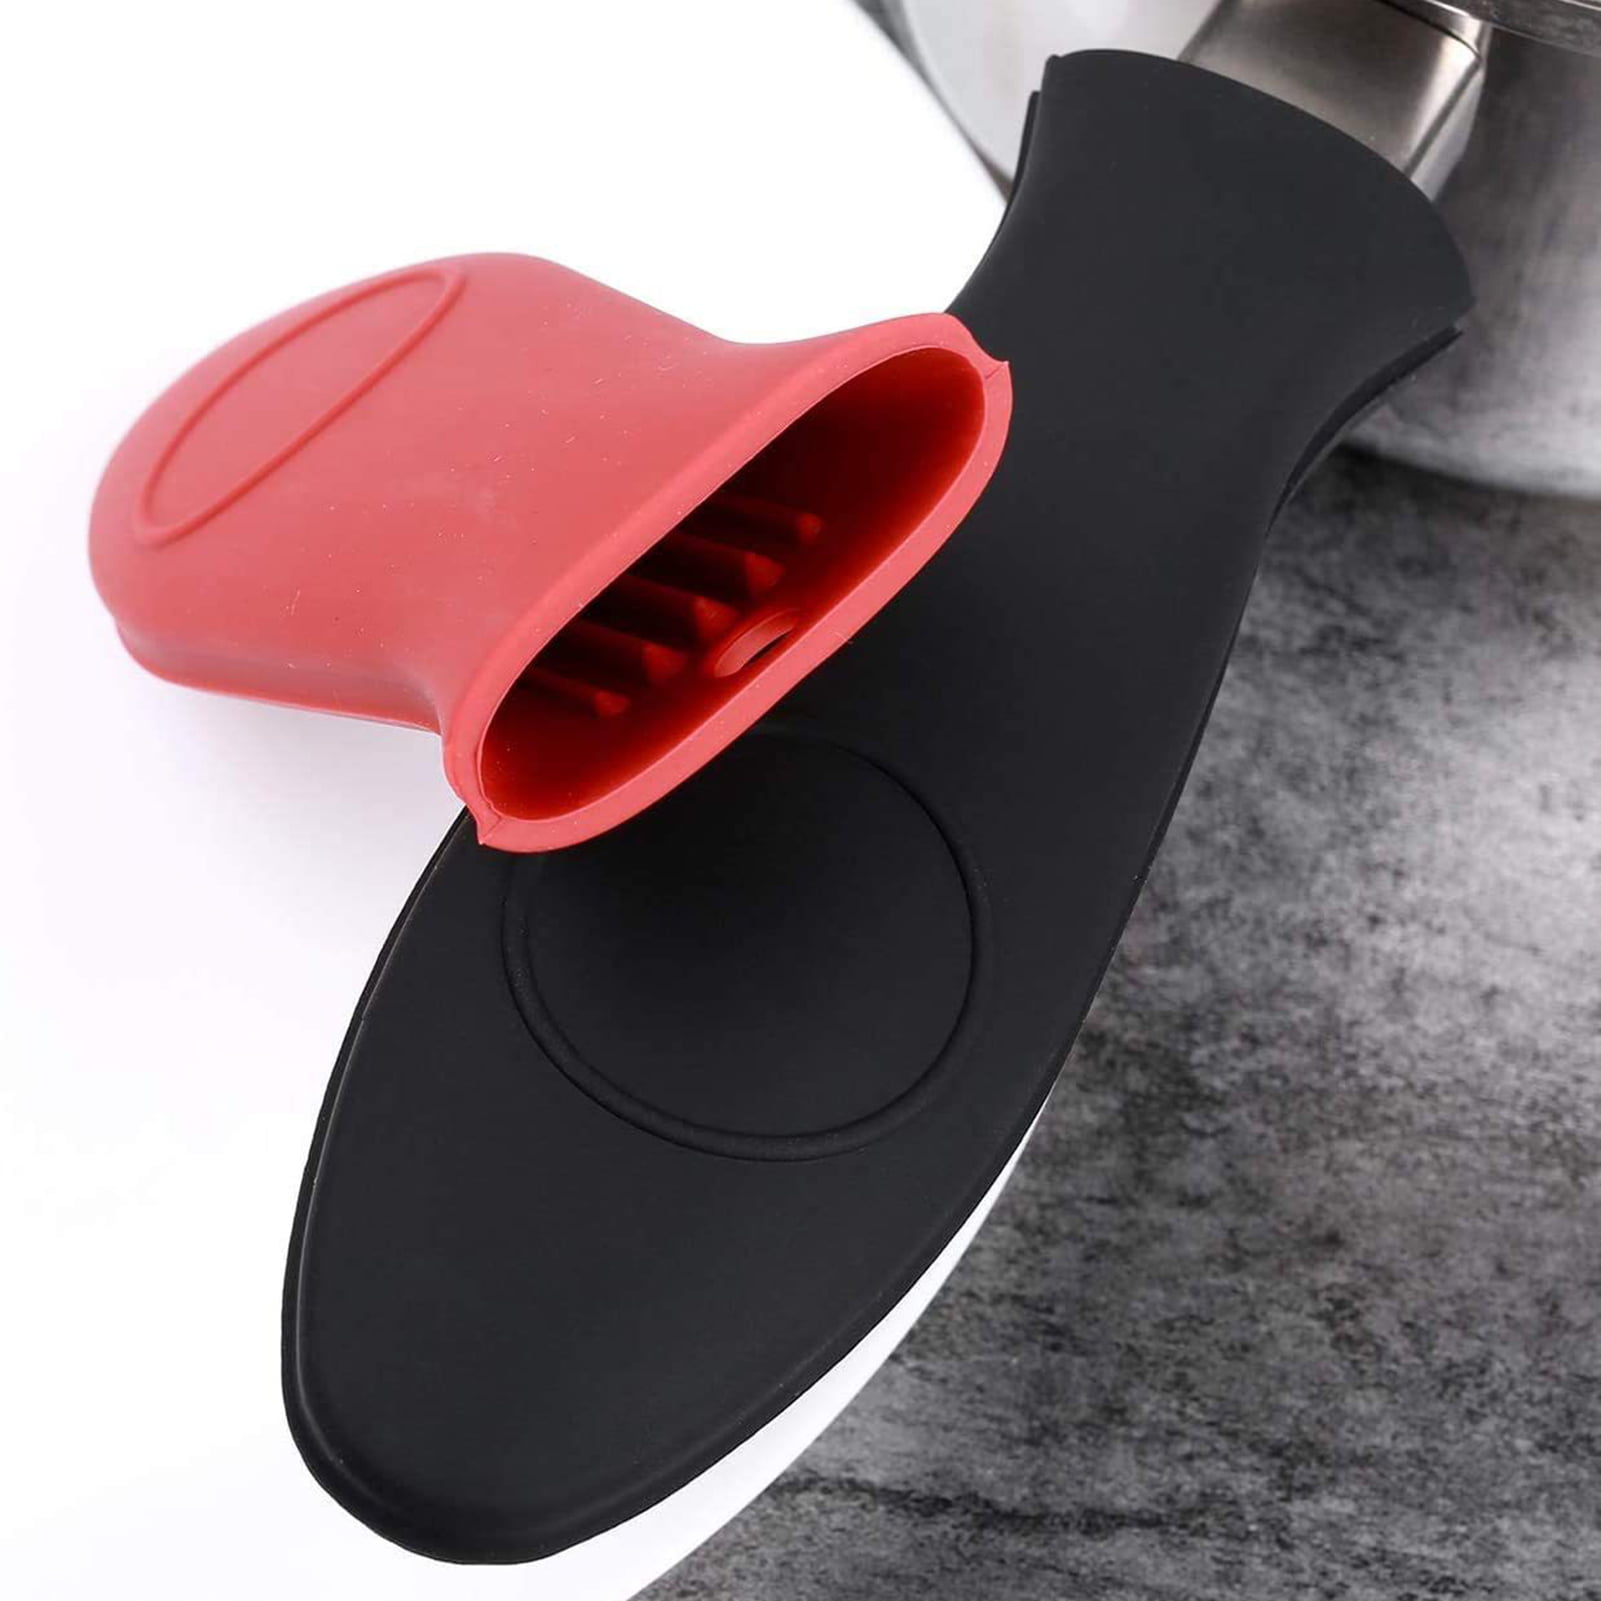 Exquisite 5 Pieces Silicone Hot Handle Holder Rubber Pot Sleeve